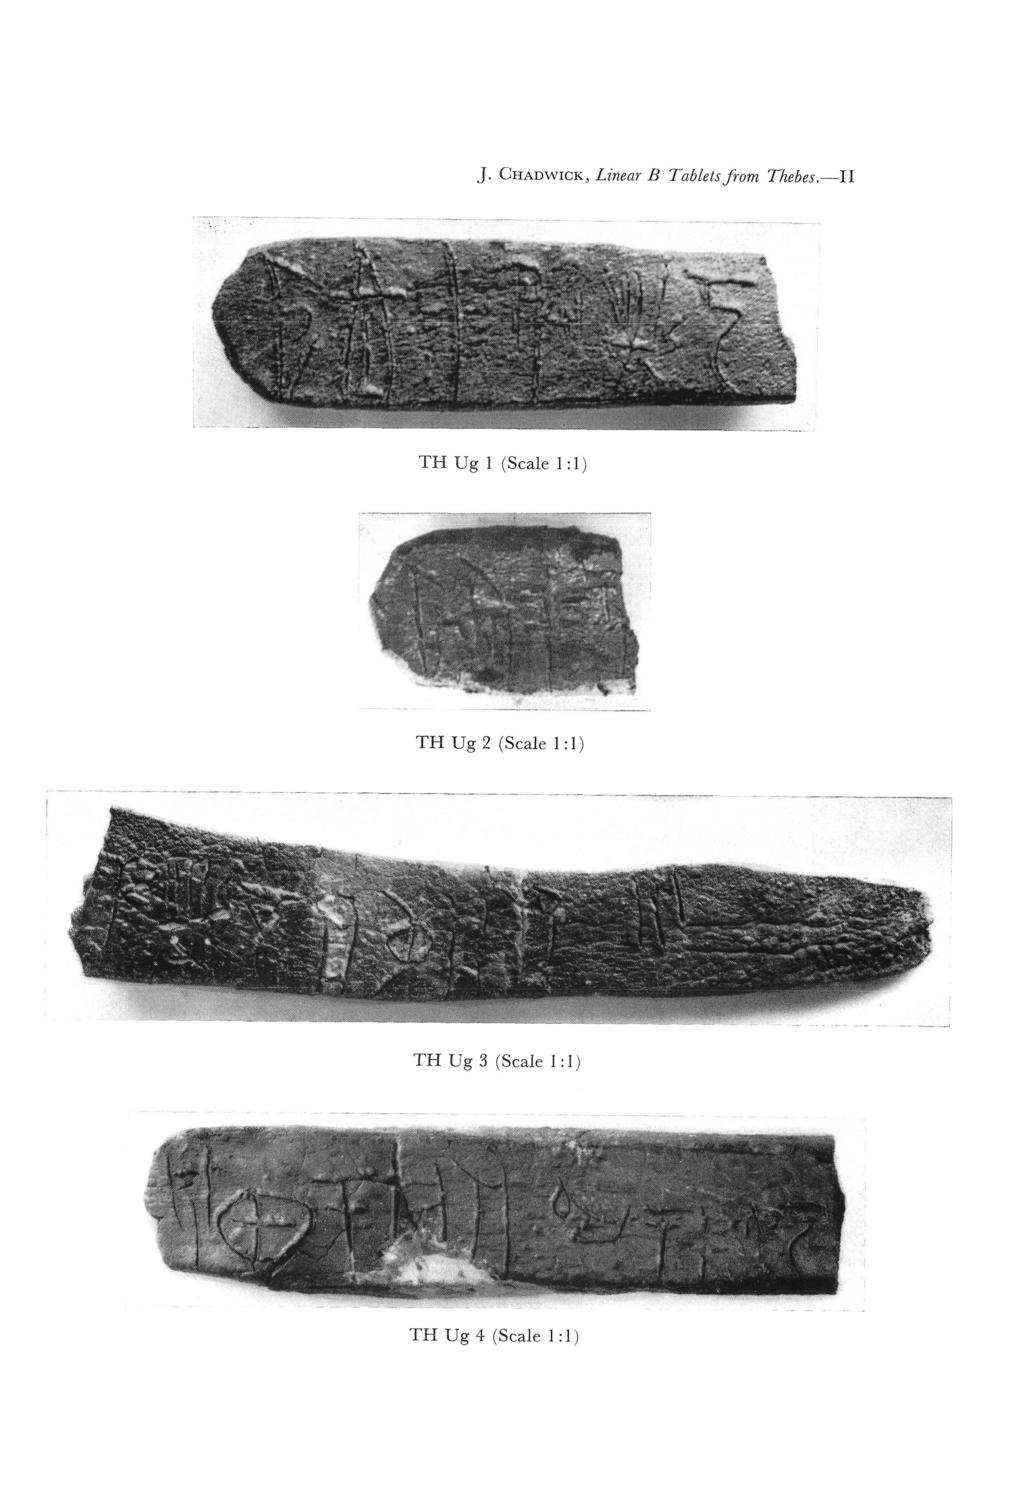 J. CHADWICK, Linear B Tablets from T H U g 1 (Scale 1:1) T H U g 2 (Scale 1:1] T H U g 3 (Scale 1:1)